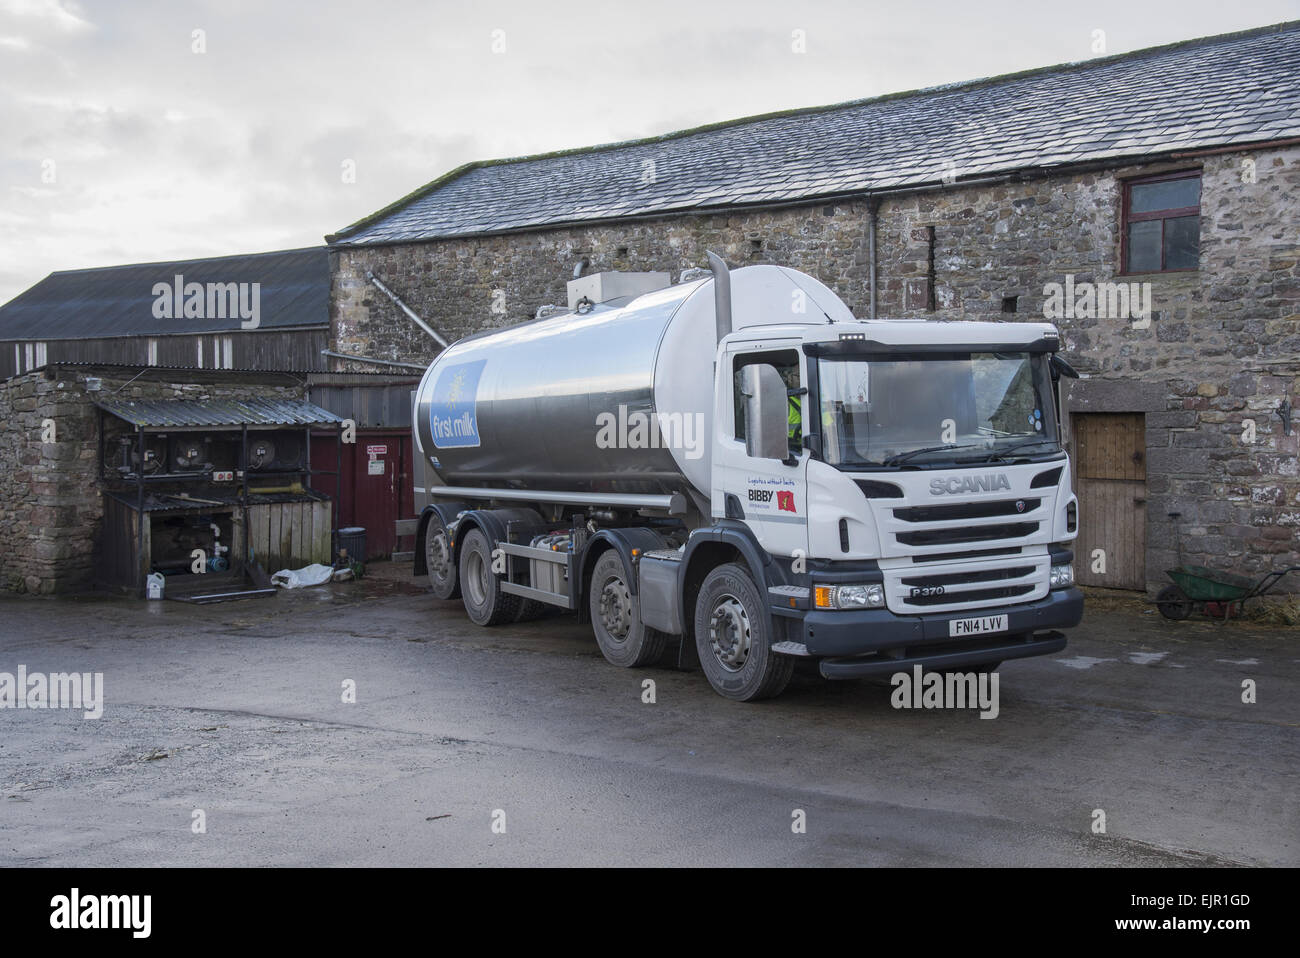 Dairy farming, First Milk tanker collecting milk from farm, Church Brough, Kirkby Stephen, Cumbria, England, December Stock Photo